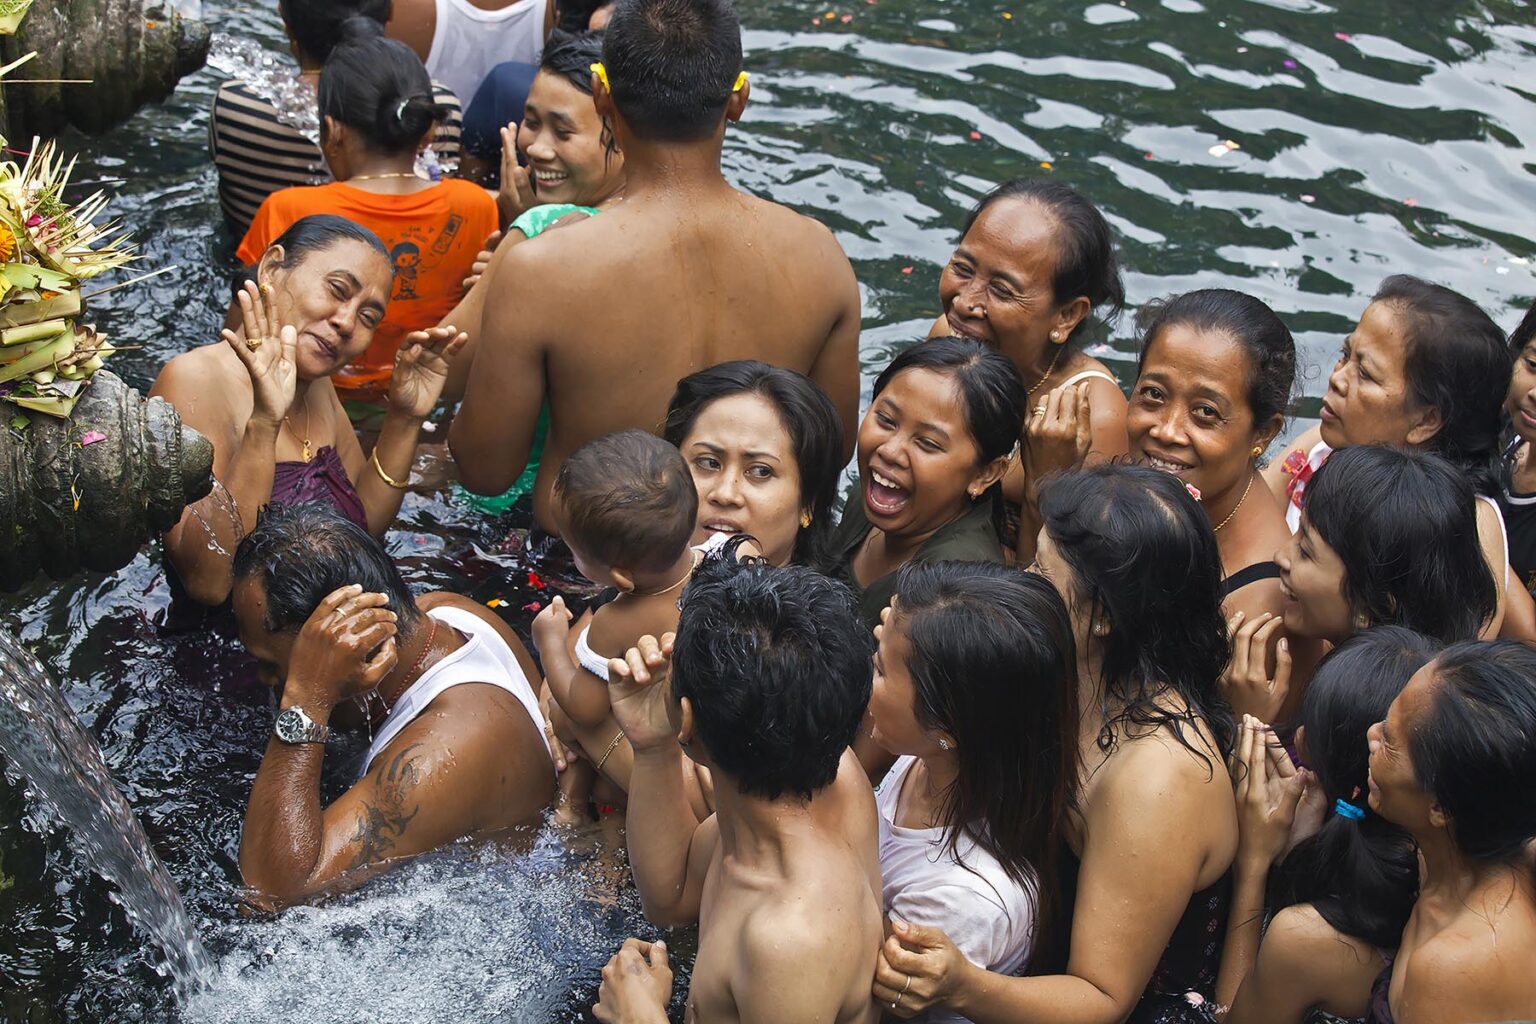 People bath in the holy waters of the cold spring at the PURA TIRTA EMPUL TEMPLE COMPLEX during the Galungan Festival -  TAMPAKSIRING, BALI, INDONESIA